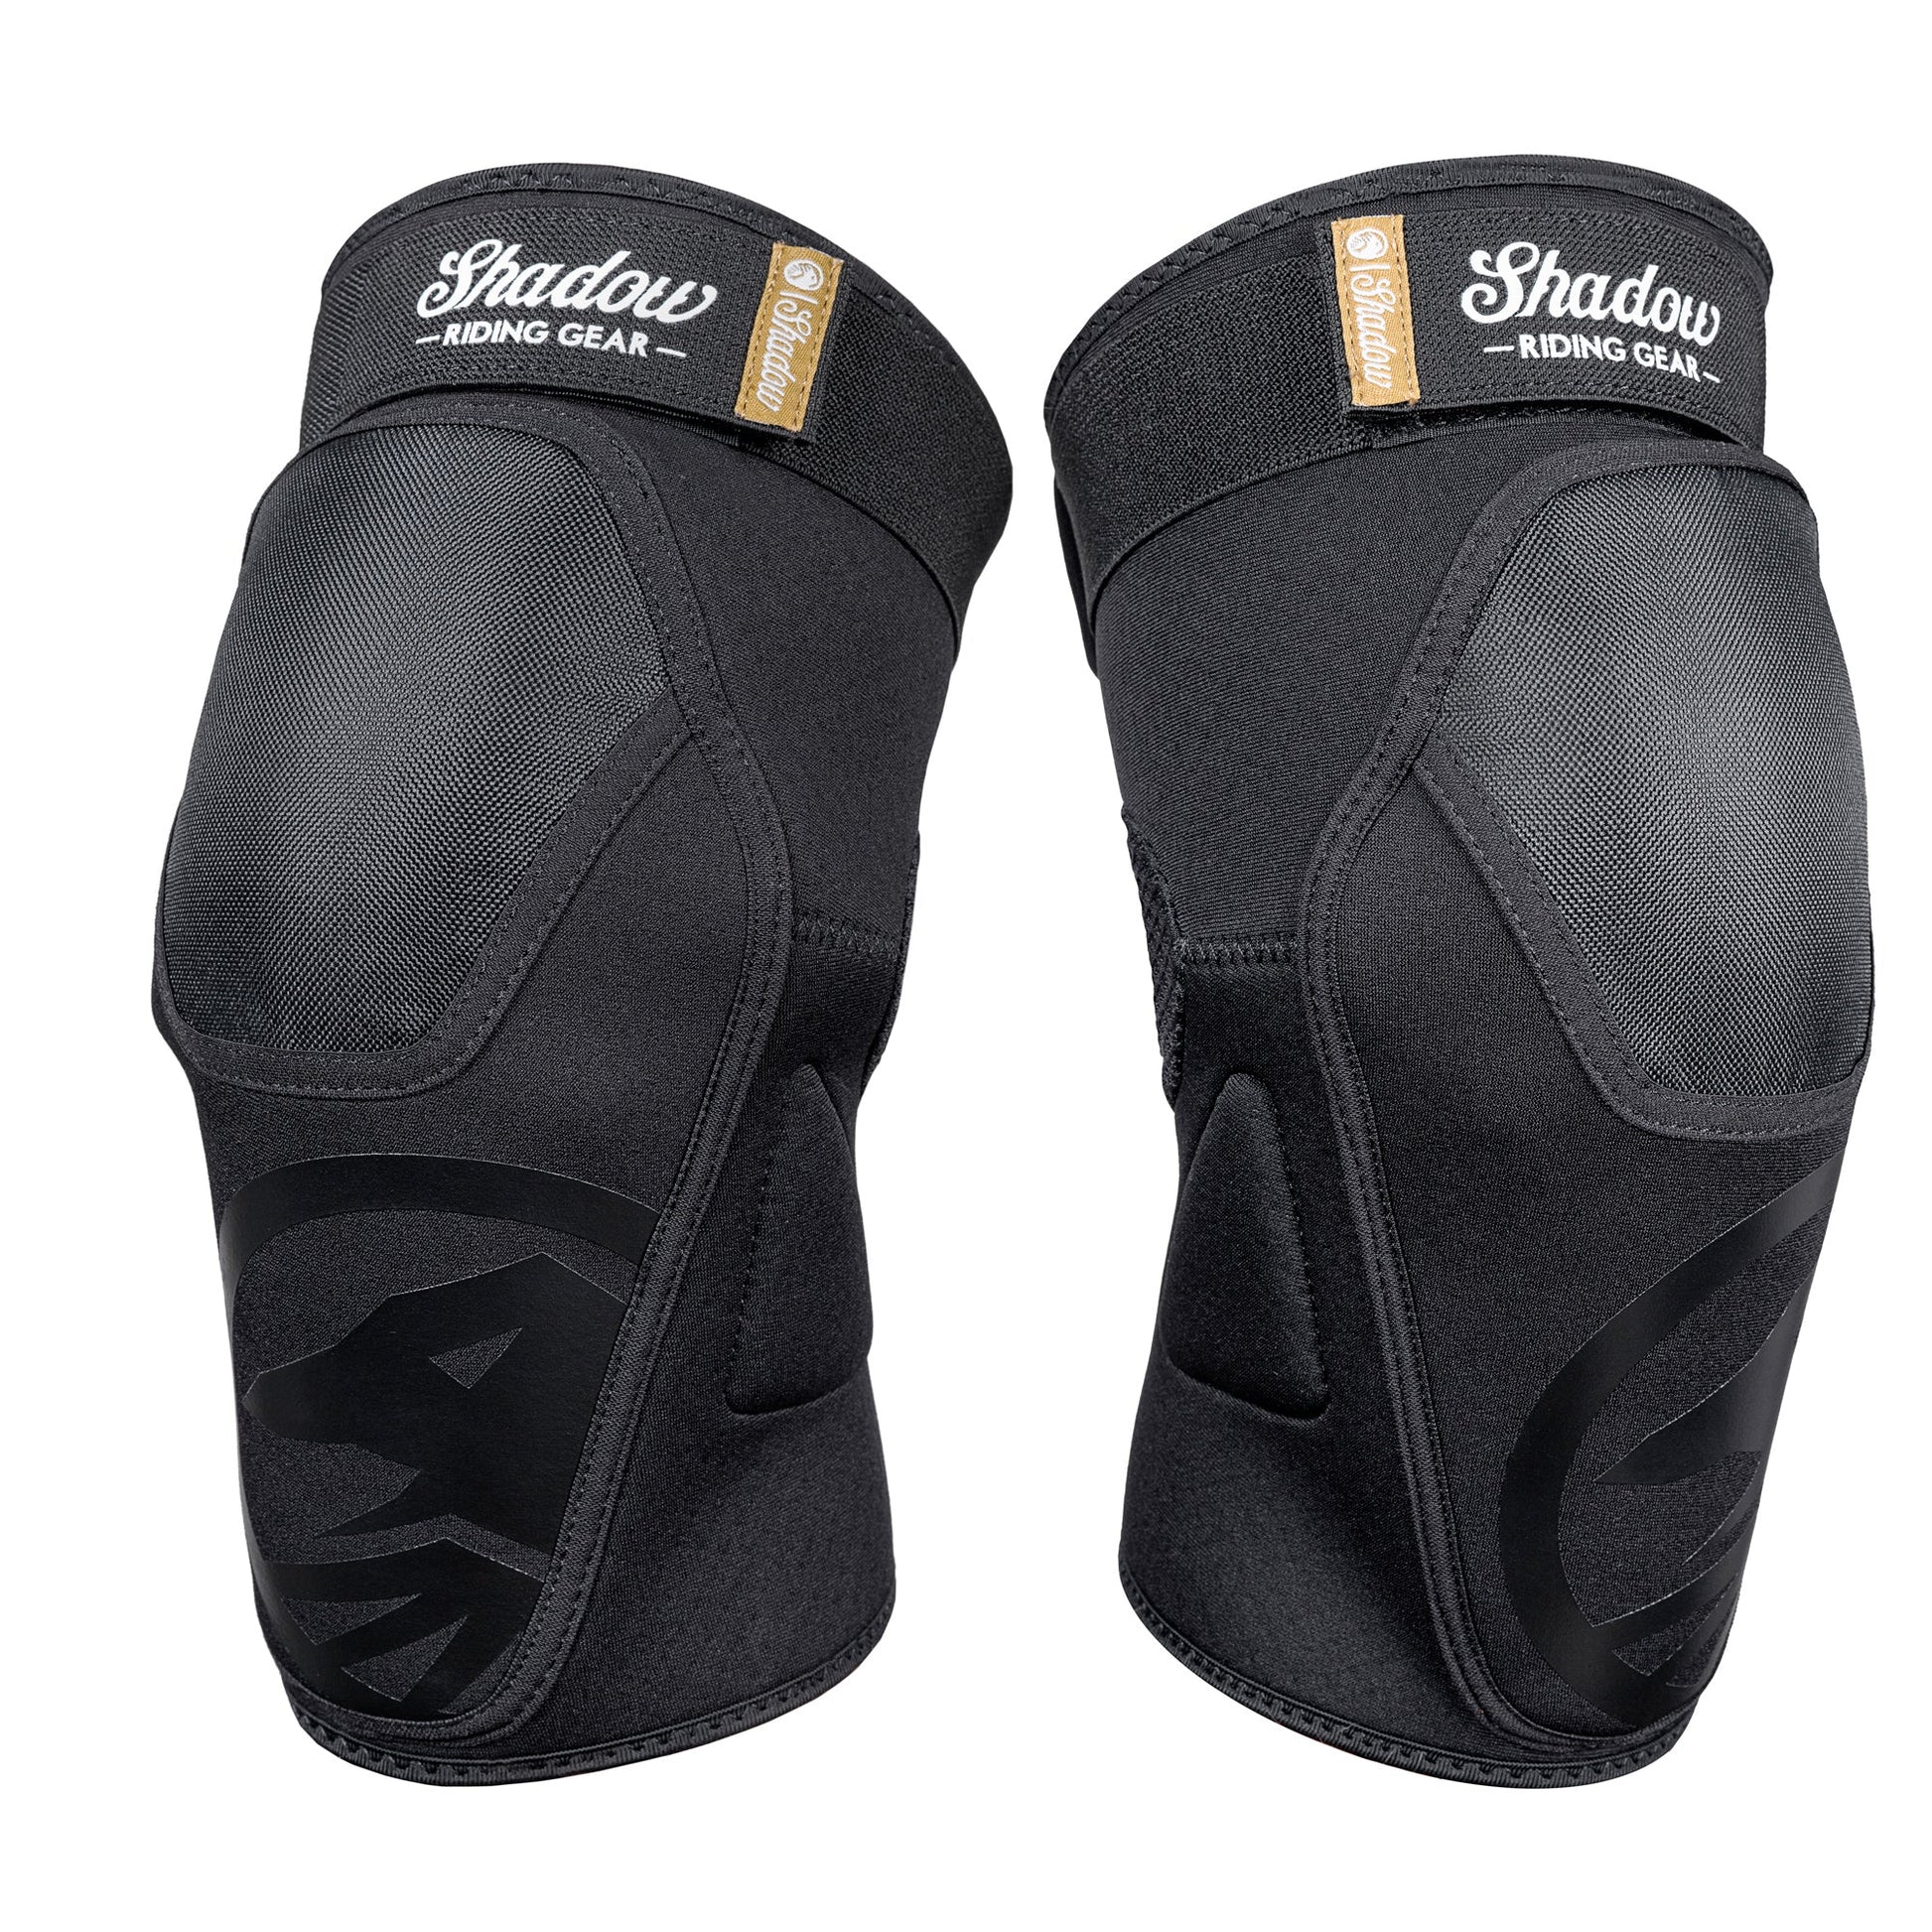 Shadow Super Slim V2 Knee Pads - Sparkys Brands Sparkys Brands  Knee, Protection, Riding Gear, Shadow Riding Gear, Super Slim, The Shadow Conspiracy bmx pro quality freestyle bicycle